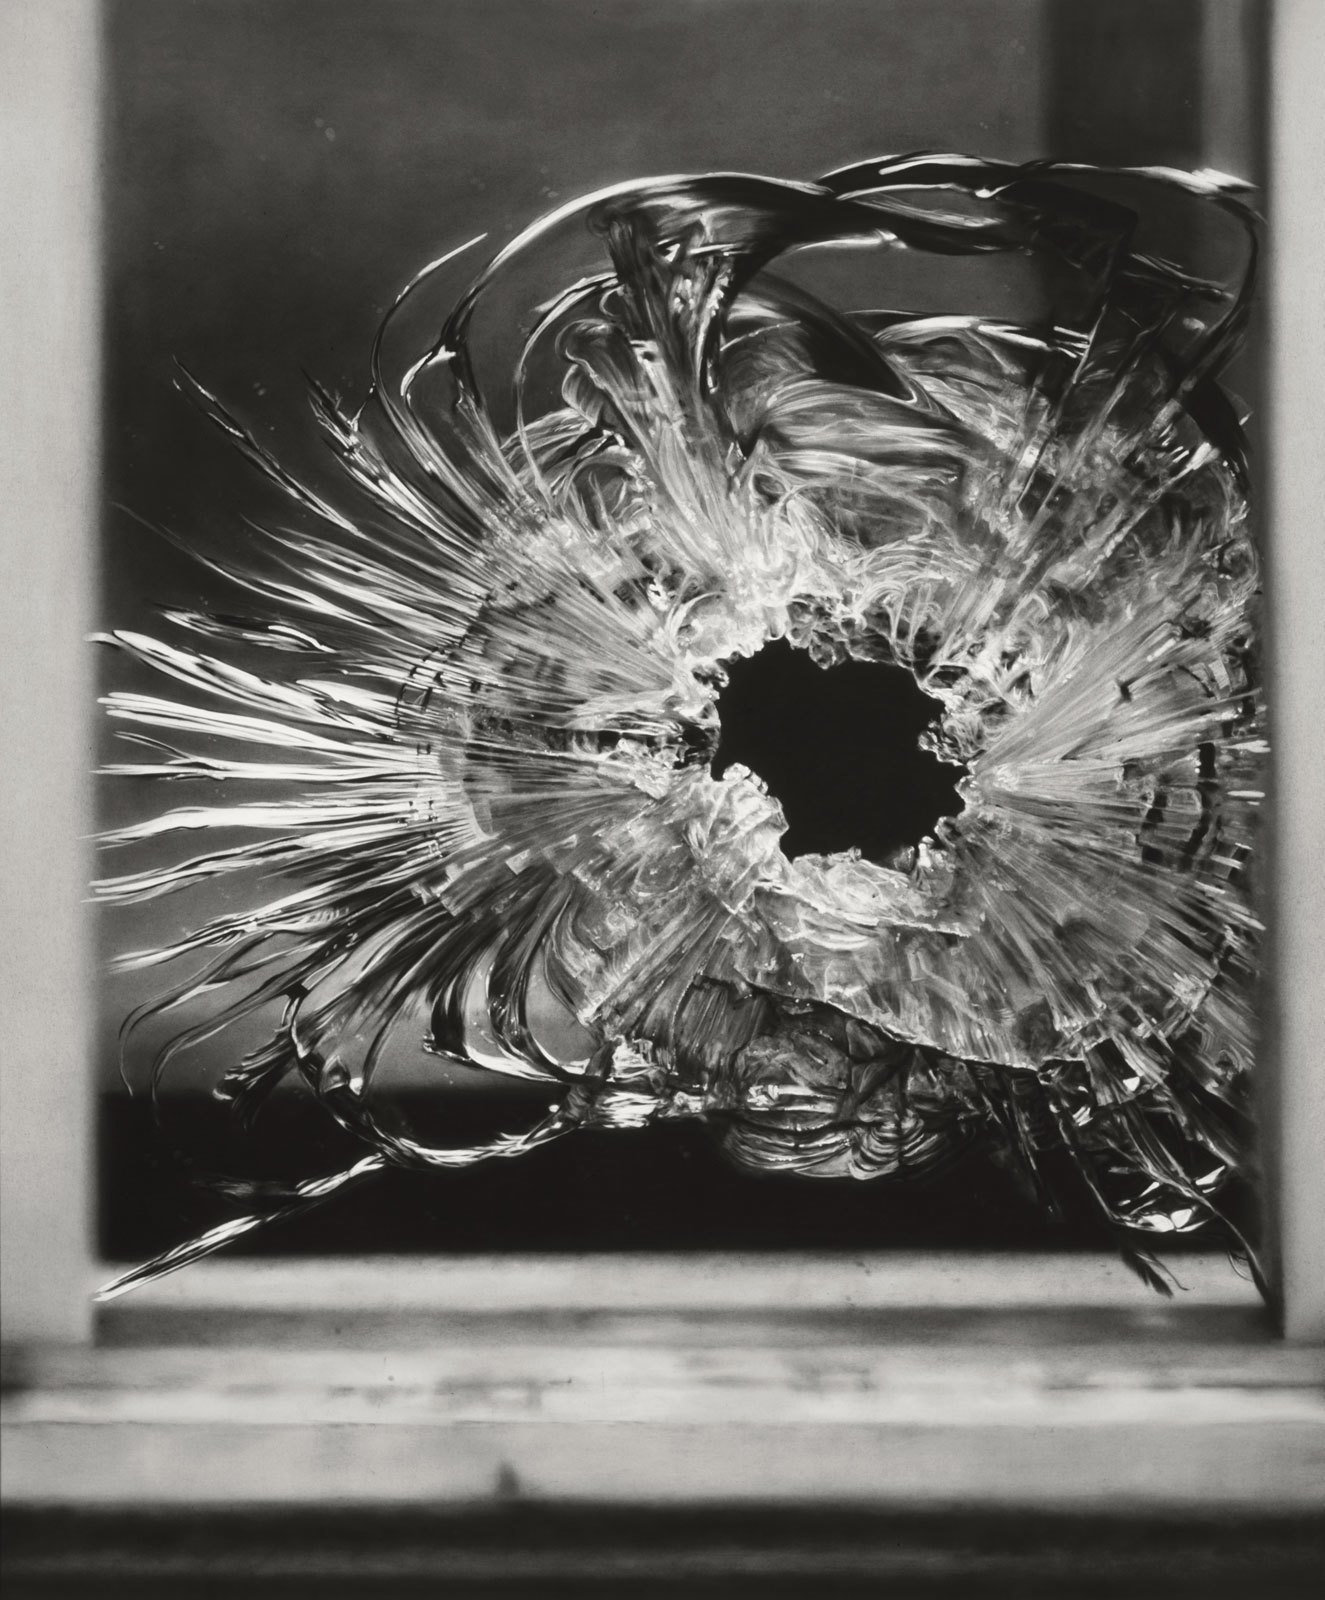 Detail of Untitled (Bullet Hole in Window, January 7, 2015)